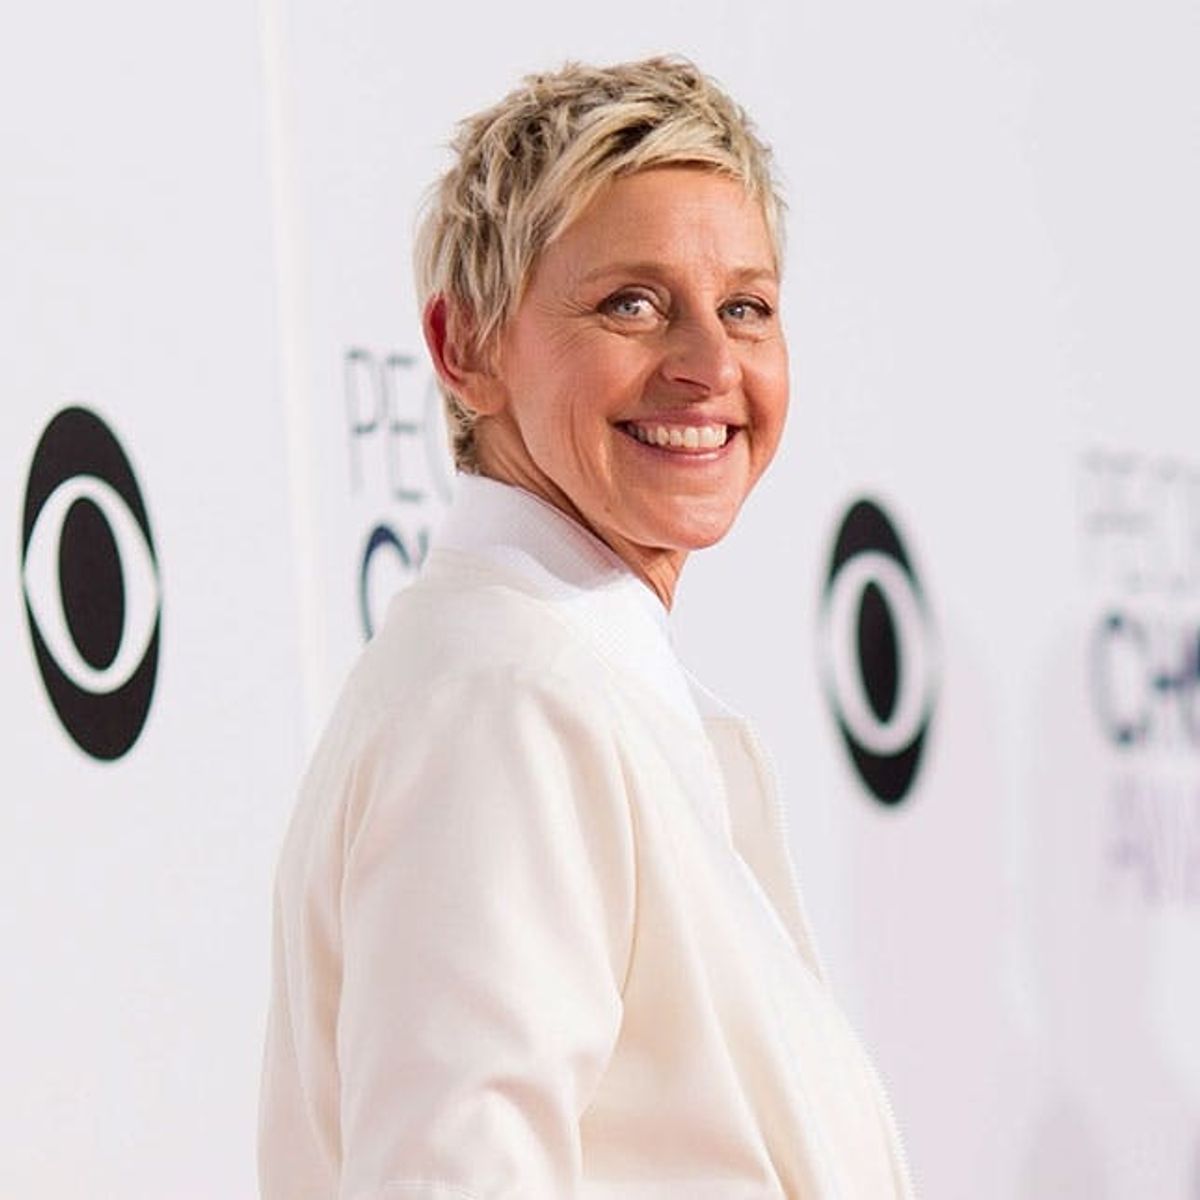 9 of Our Favorite Pieces from Ellen DeGeneres’ New Clothing + Home Decor Line